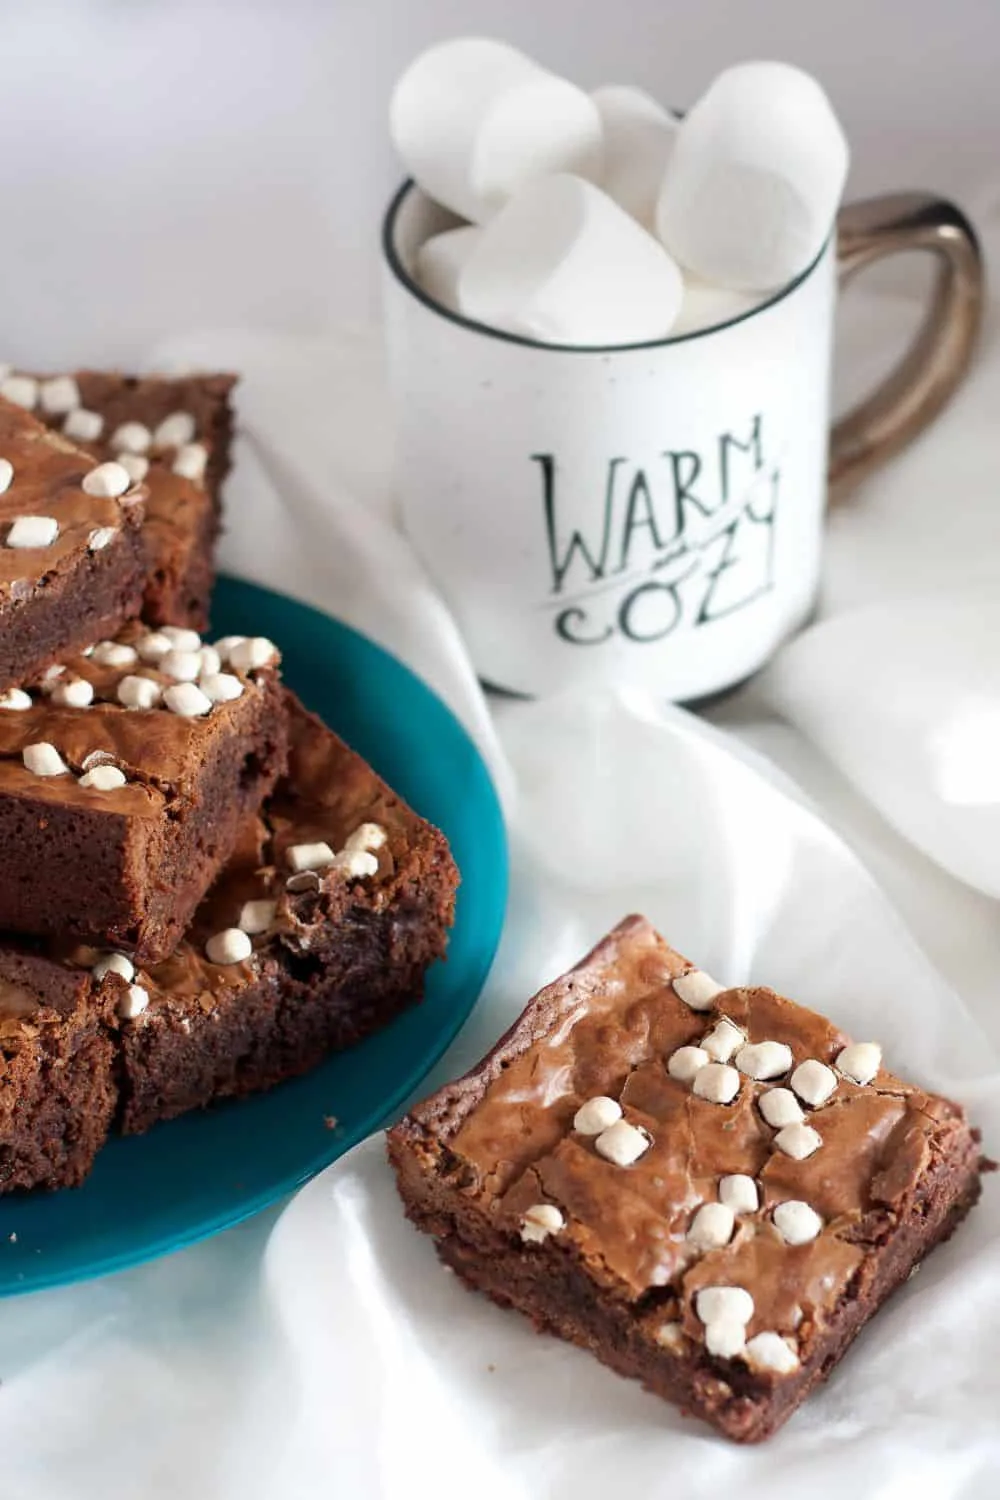 To die for caramel hot chocolate brownies! A fudgy, creative dessert using hot chocolate mix. Drizzle with extra caramel after baking for a super decadent treat.